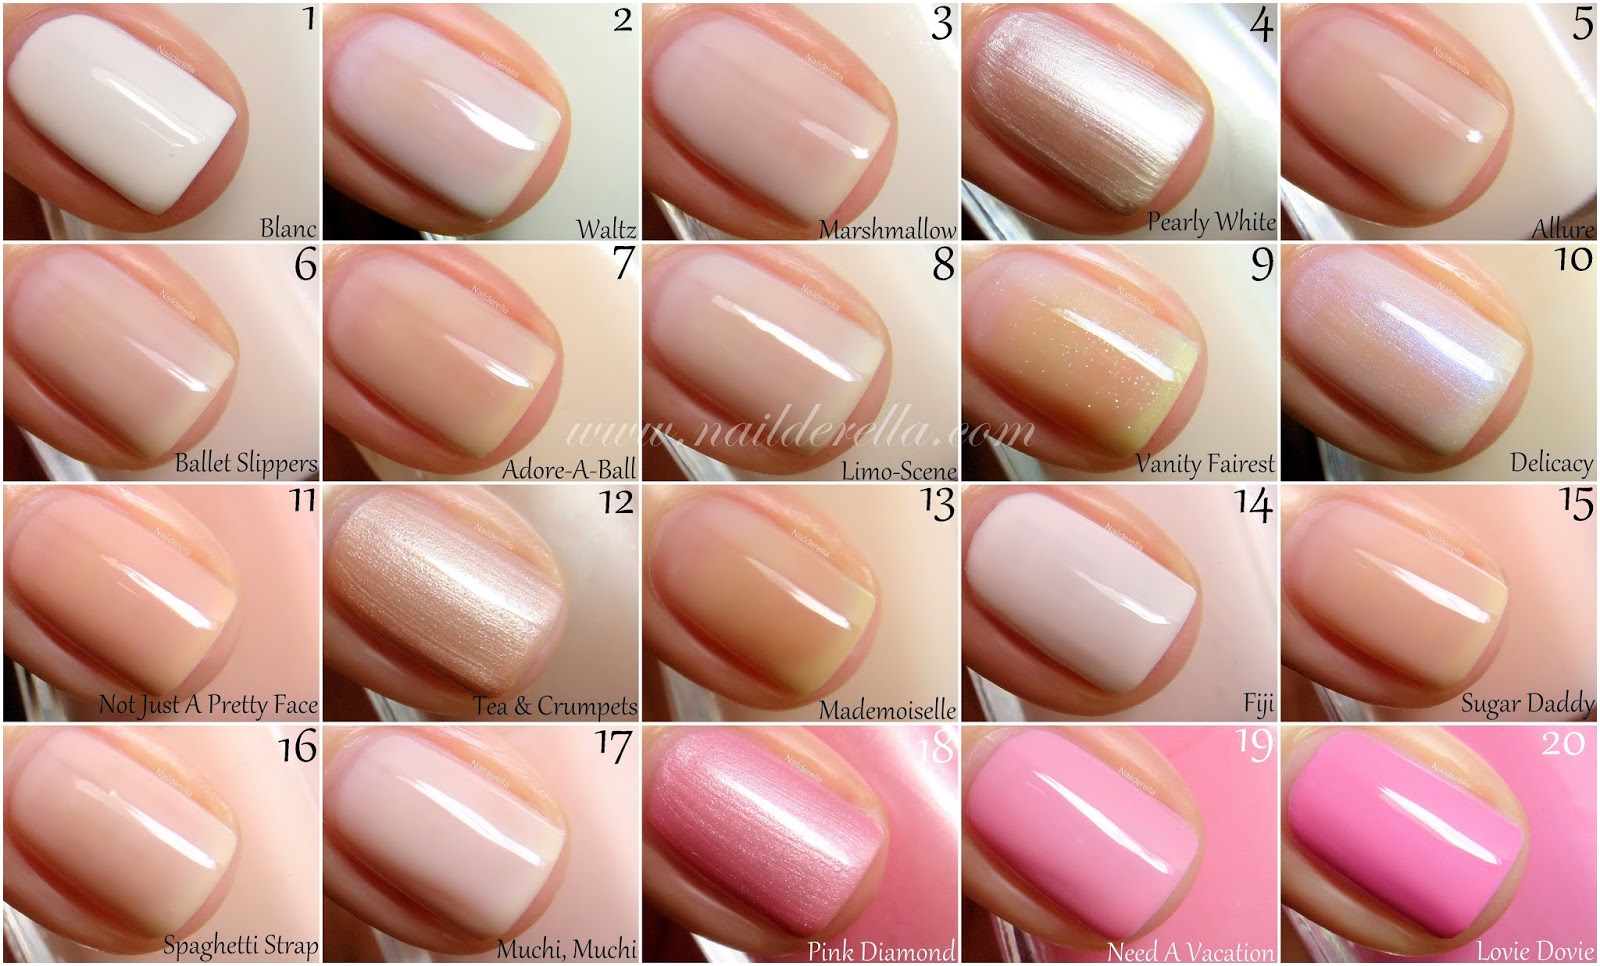 5. Ipsy's 2024 Fun Nail Polish Color Swatches - wide 3